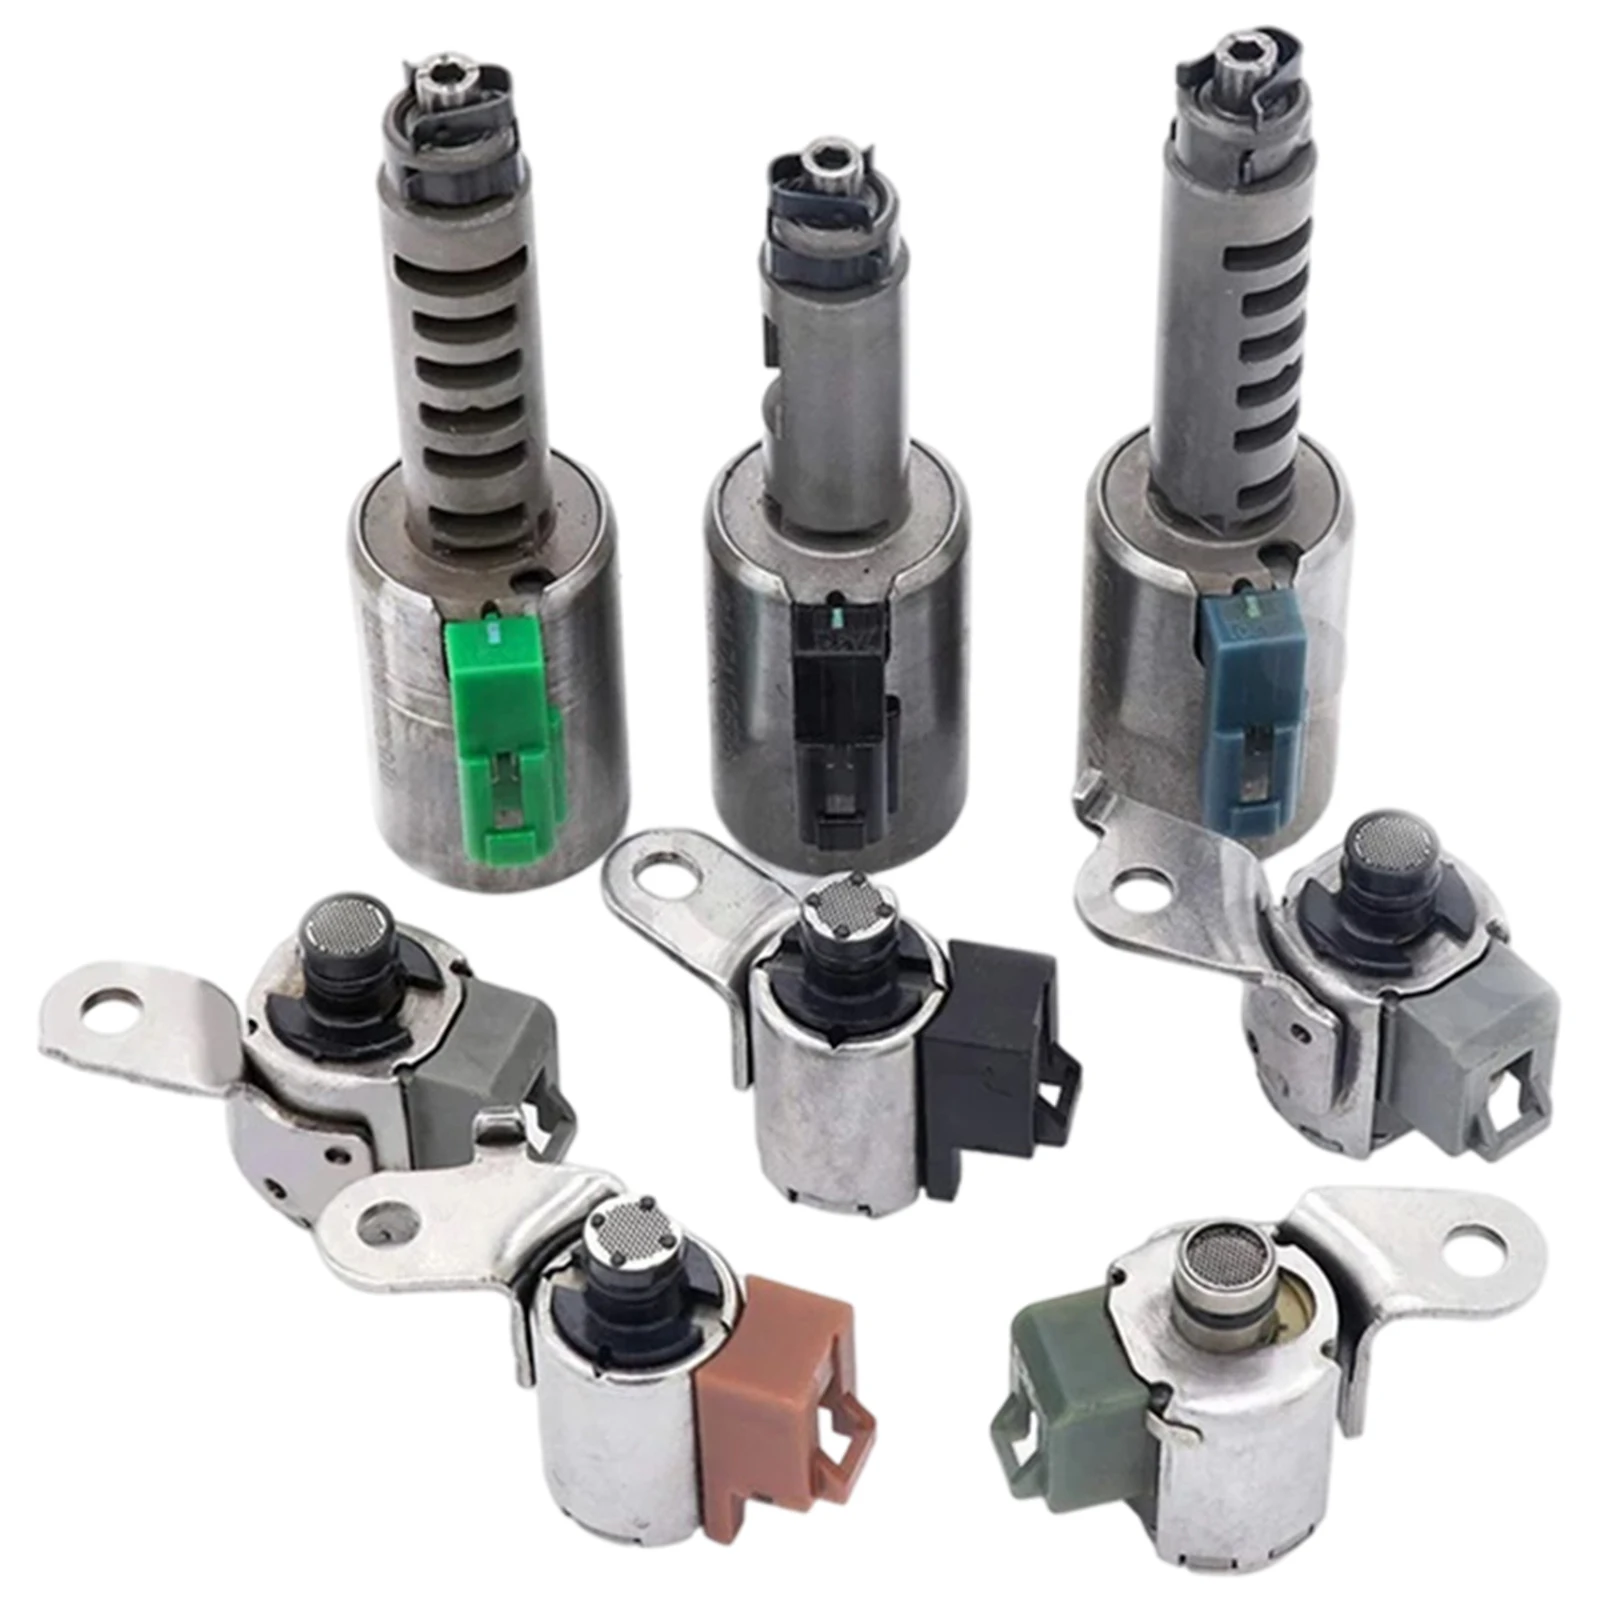 8x AW55-50SN 55-51SN RE5F22A AF33-5 AW235 Transmission Solenoids Car Interchange Accessories Parts for Chevolet Series